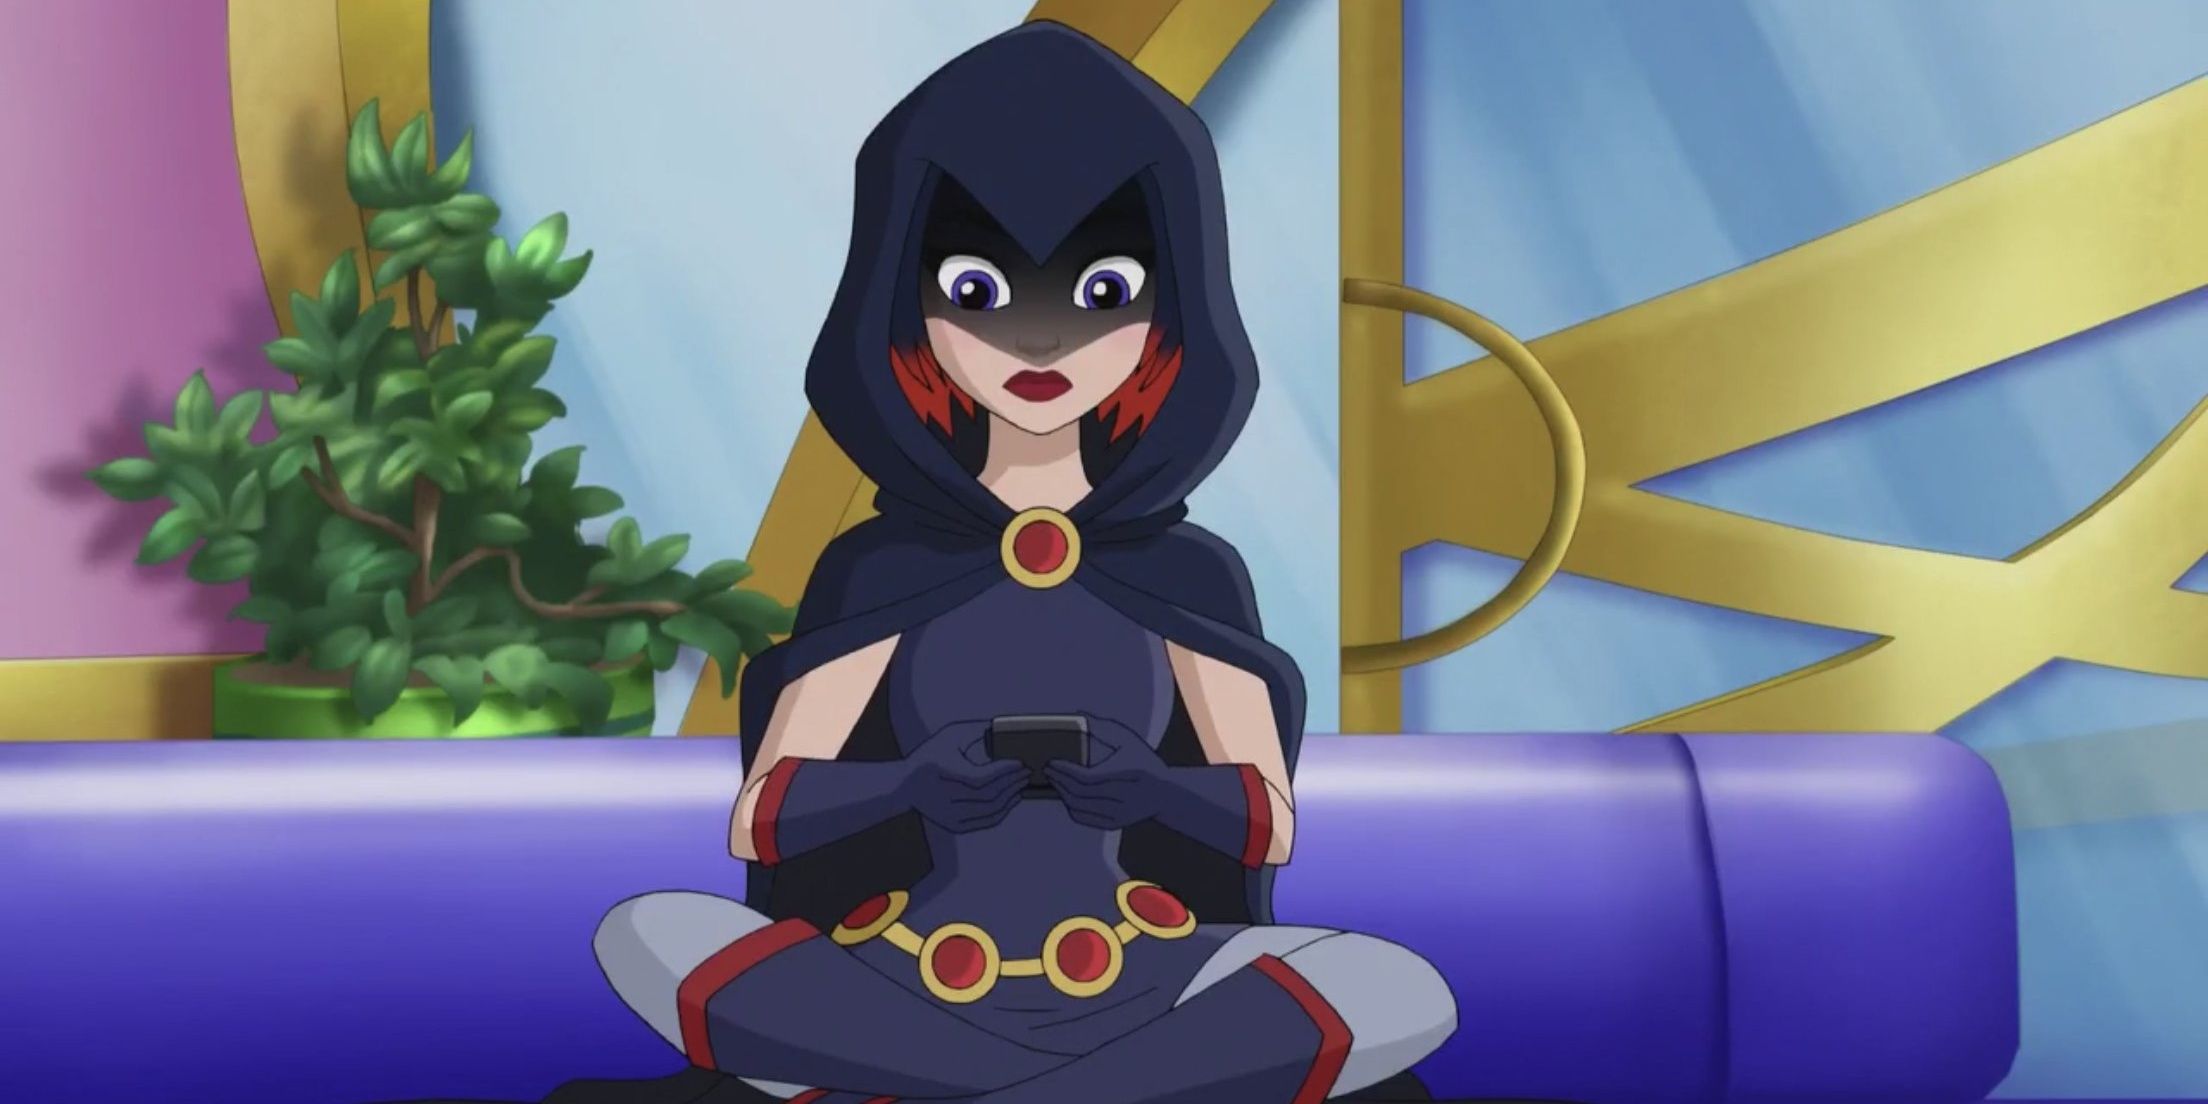 An image of Raven sitting down on the floor